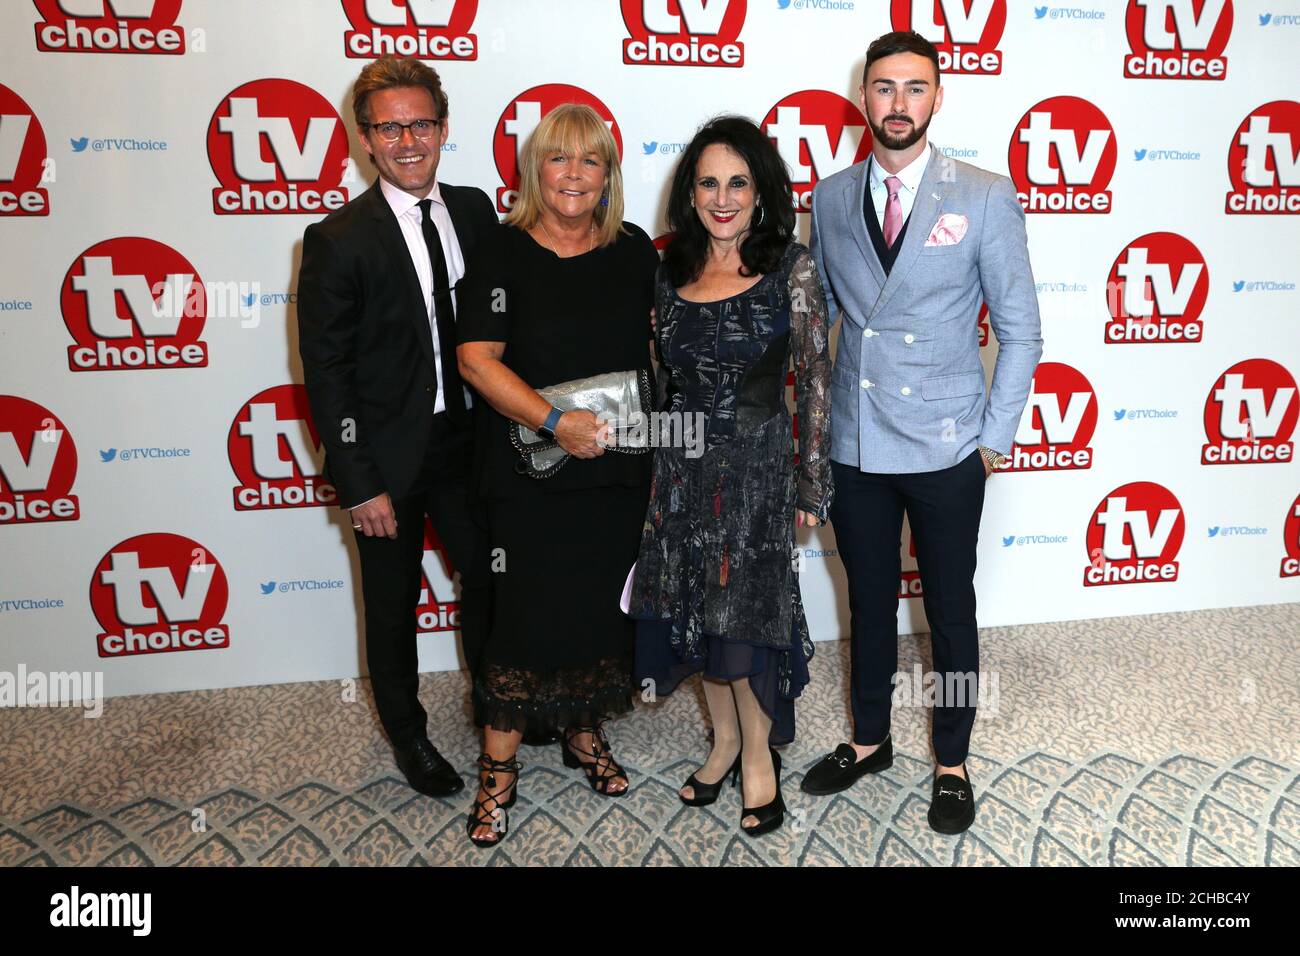 (left to right) Samuel James, Linda Robson, Lesley Joseph and Charlie Quirke arriving for the TV Choice Awards 2016 held at The Dorchester Hotel, Park Lane, London. PRESS ASSOCIATION Photo. Picture date: Monday September 5, 2016. See PA story SHOWBIZ TVChoice. Photo credit should read: Daniel Leal-Olivas/PA Wire Stock Photo